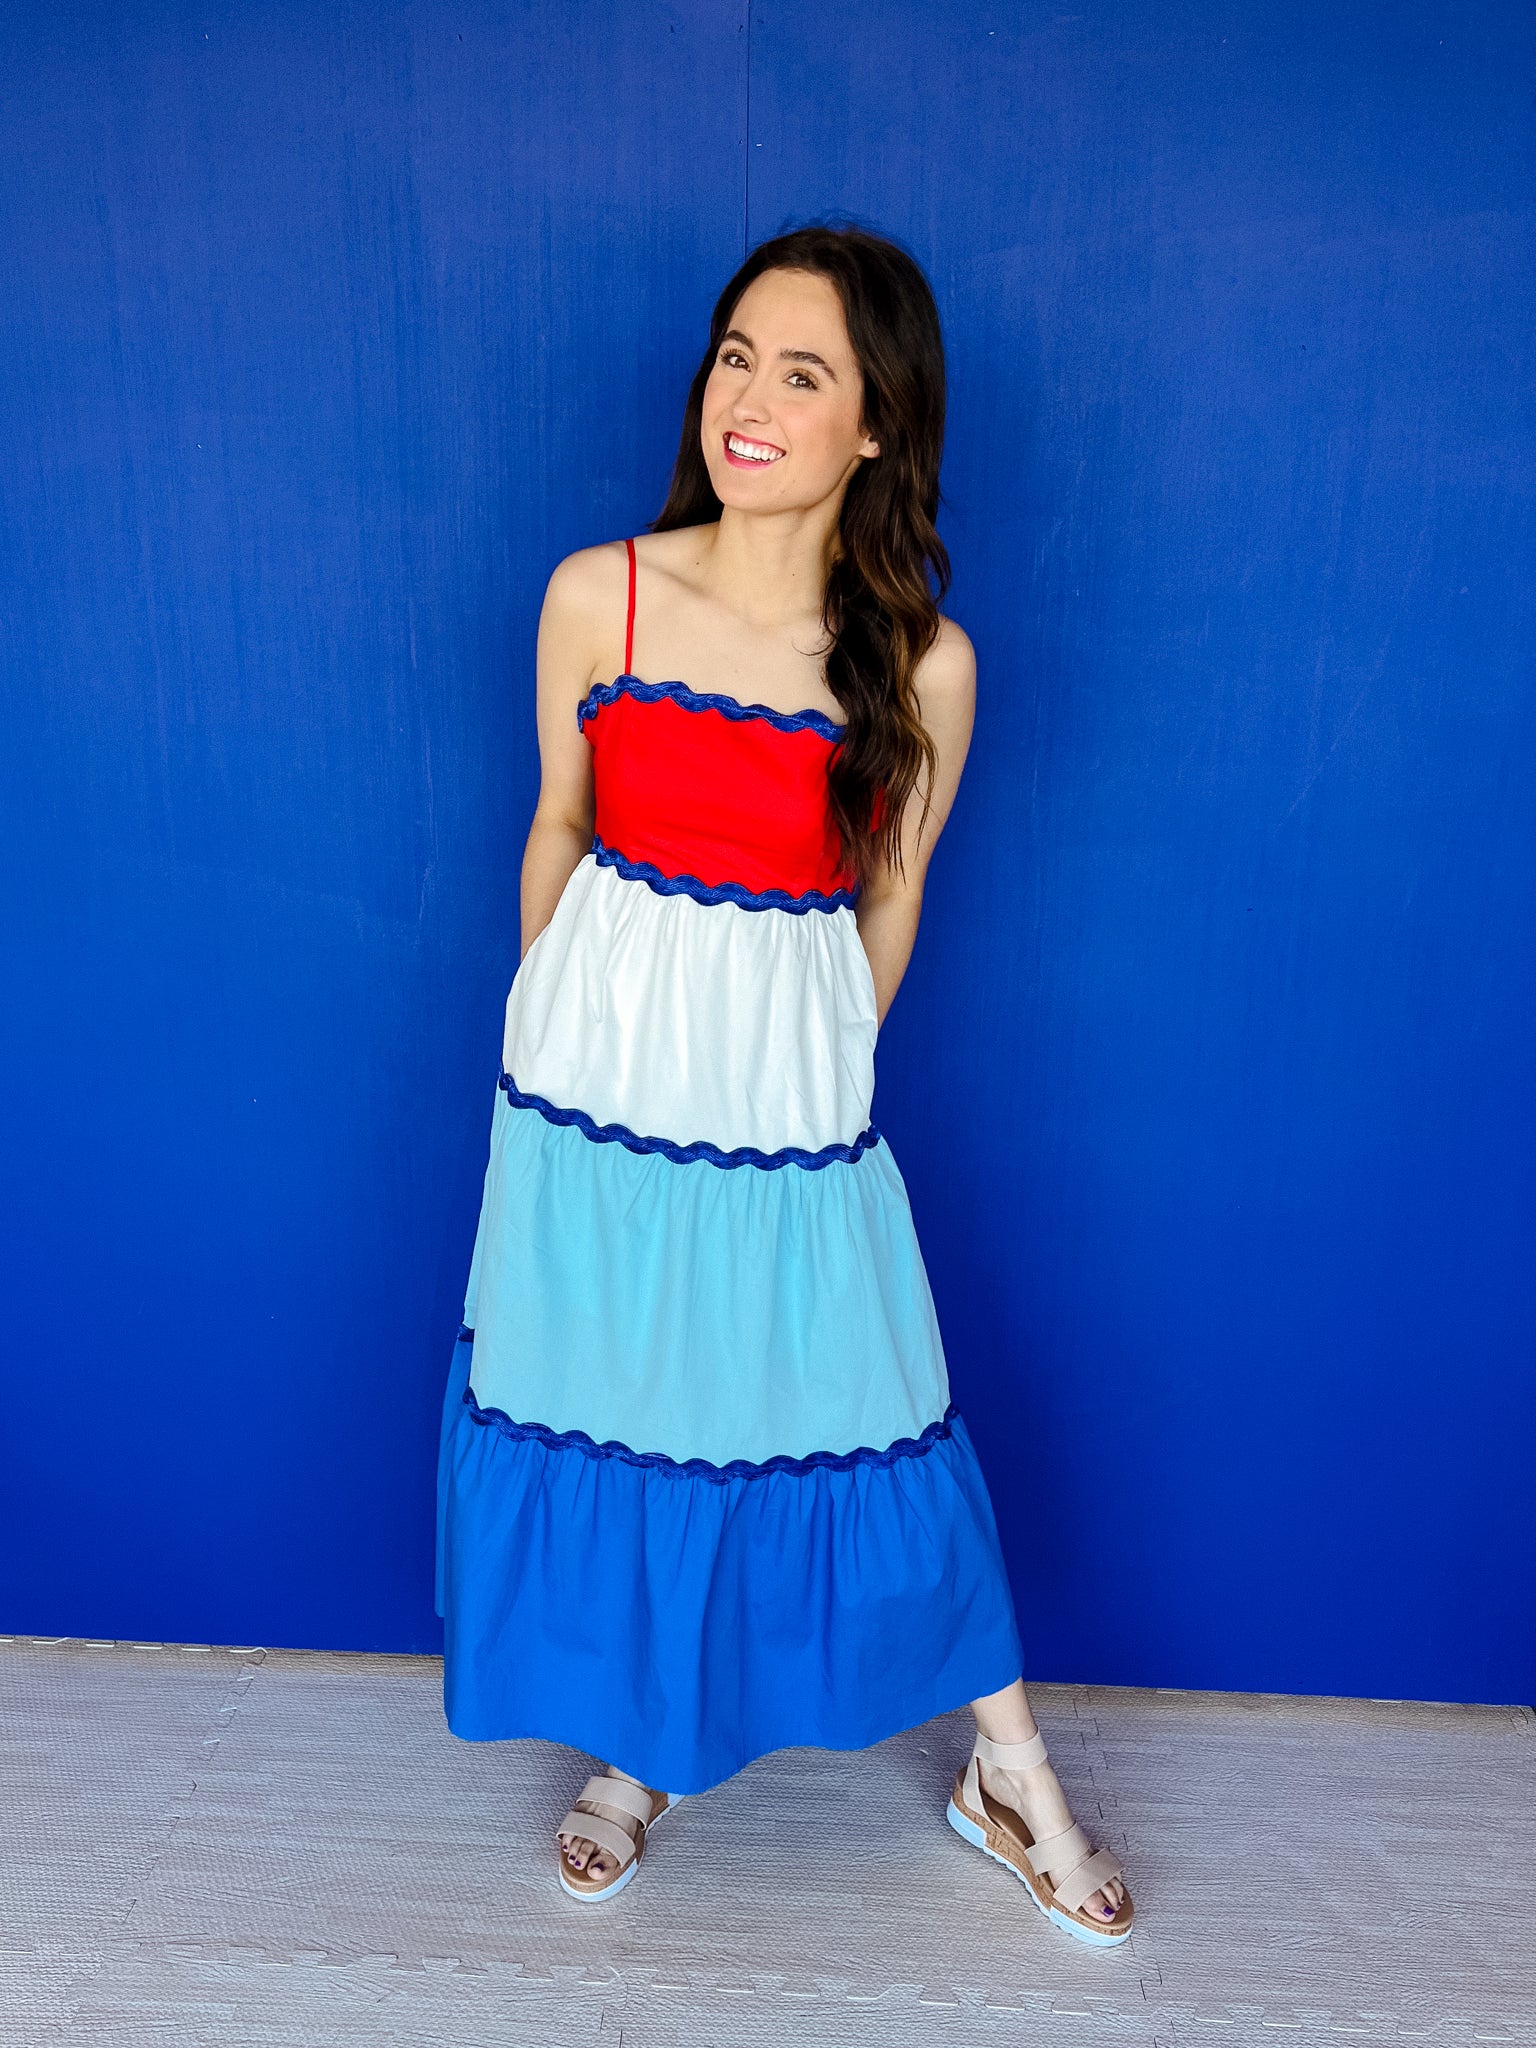 Americana Tiered Dress - Cool Red + White + Blue